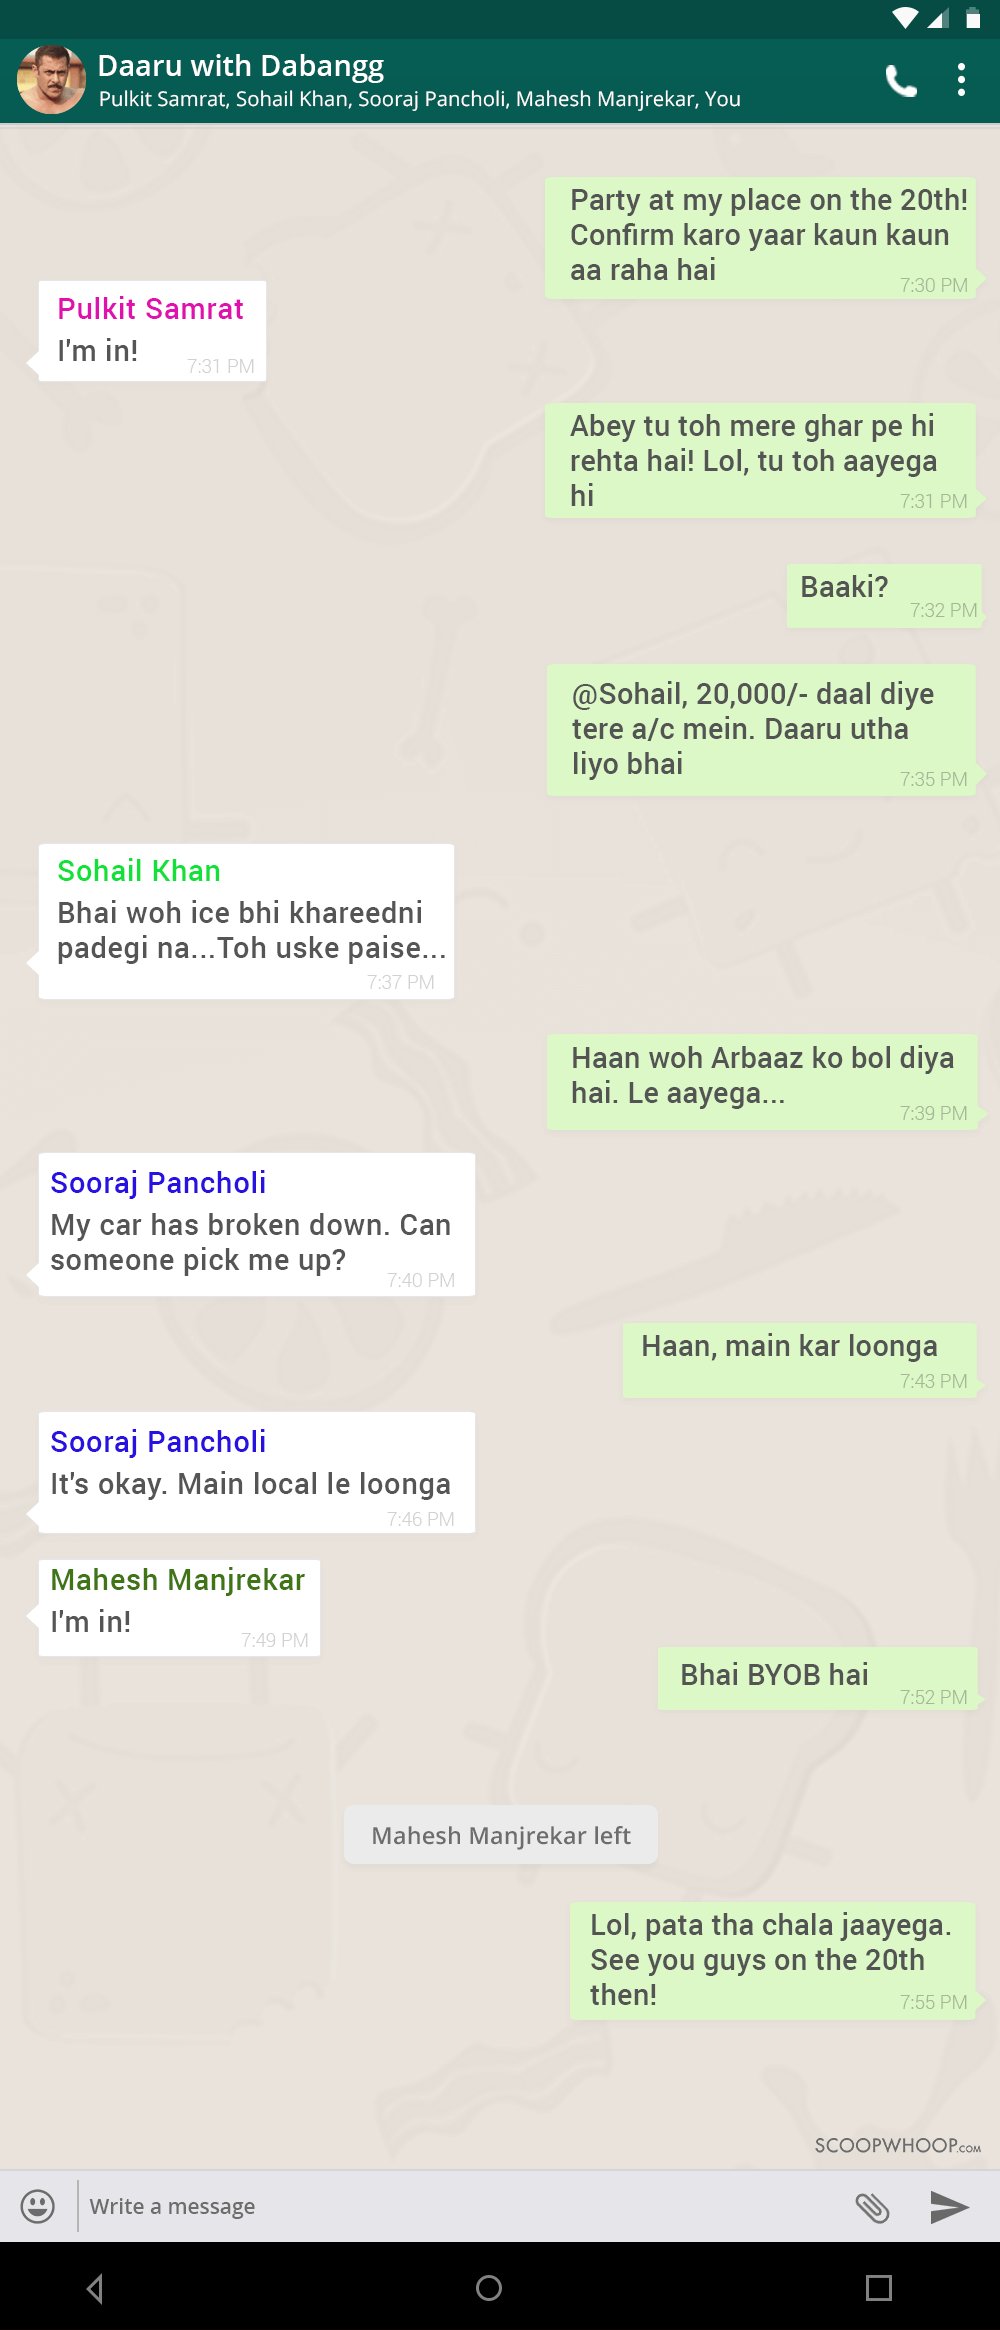 Conversations Of Indian Celebrities On Their Own Whatsapp